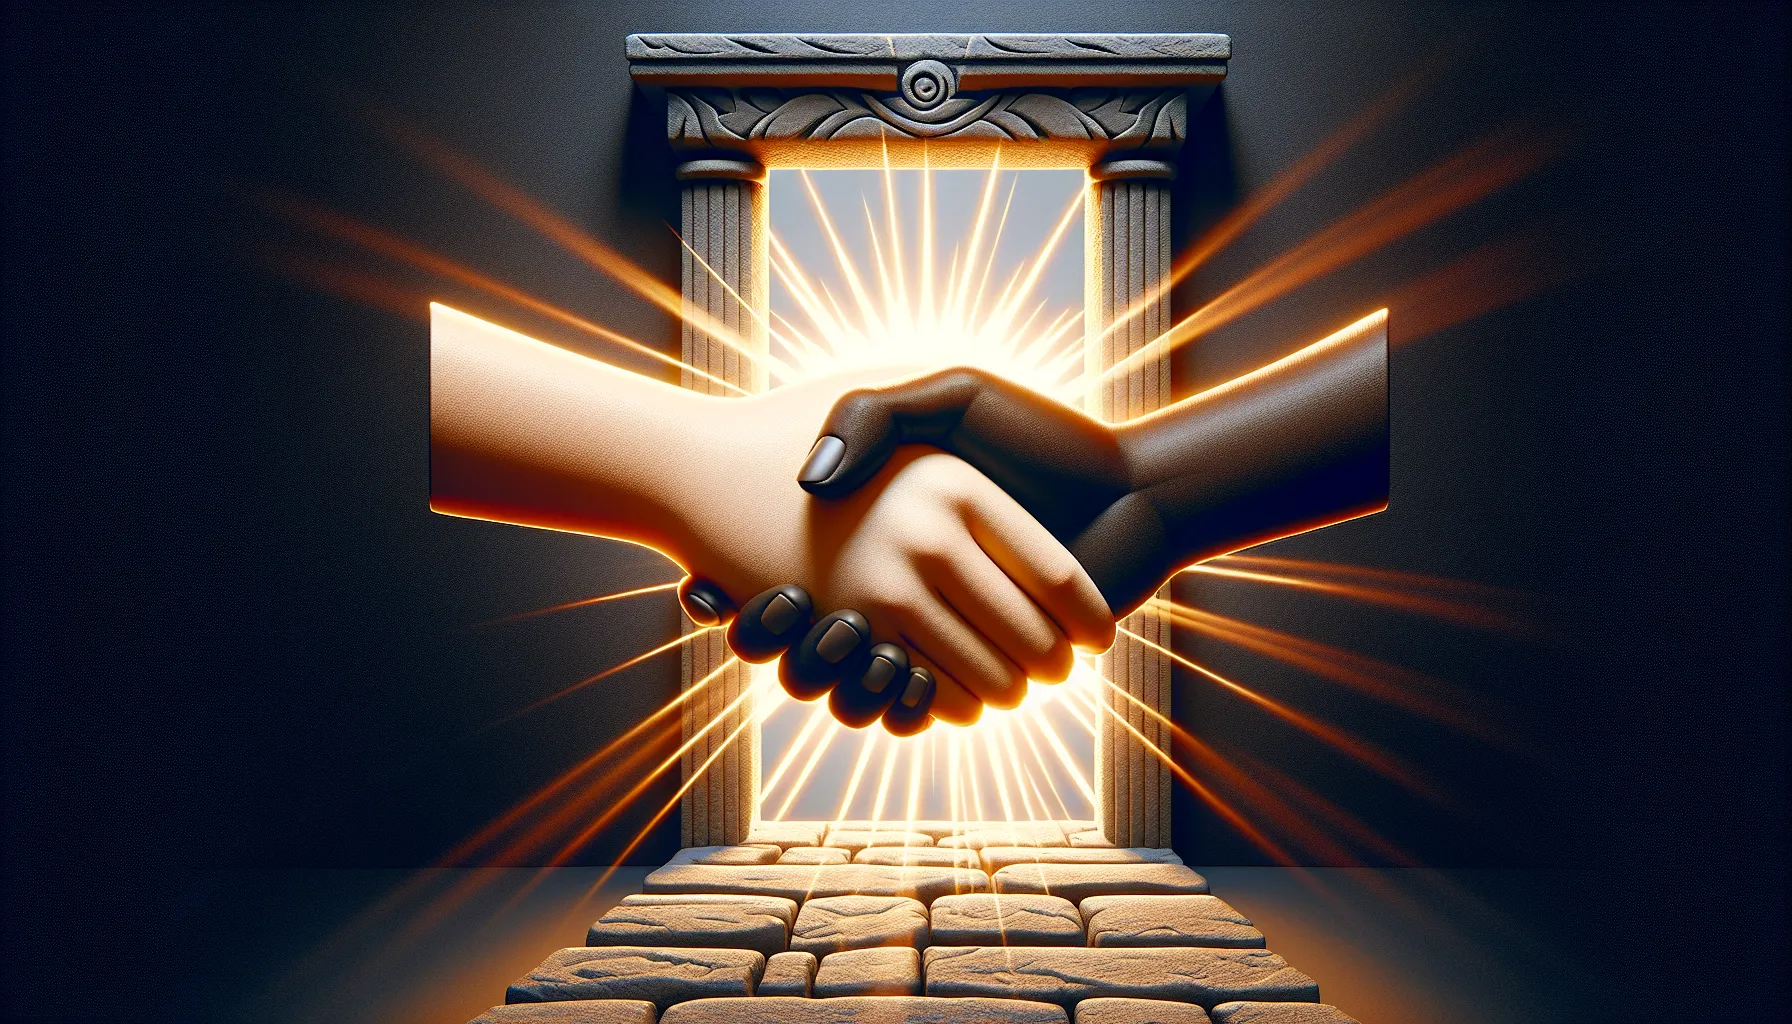 <strong>Entwined by choice,</strong> each handshake is the silent language of trust, laying the unshakeable stones of a relationship's foundation.